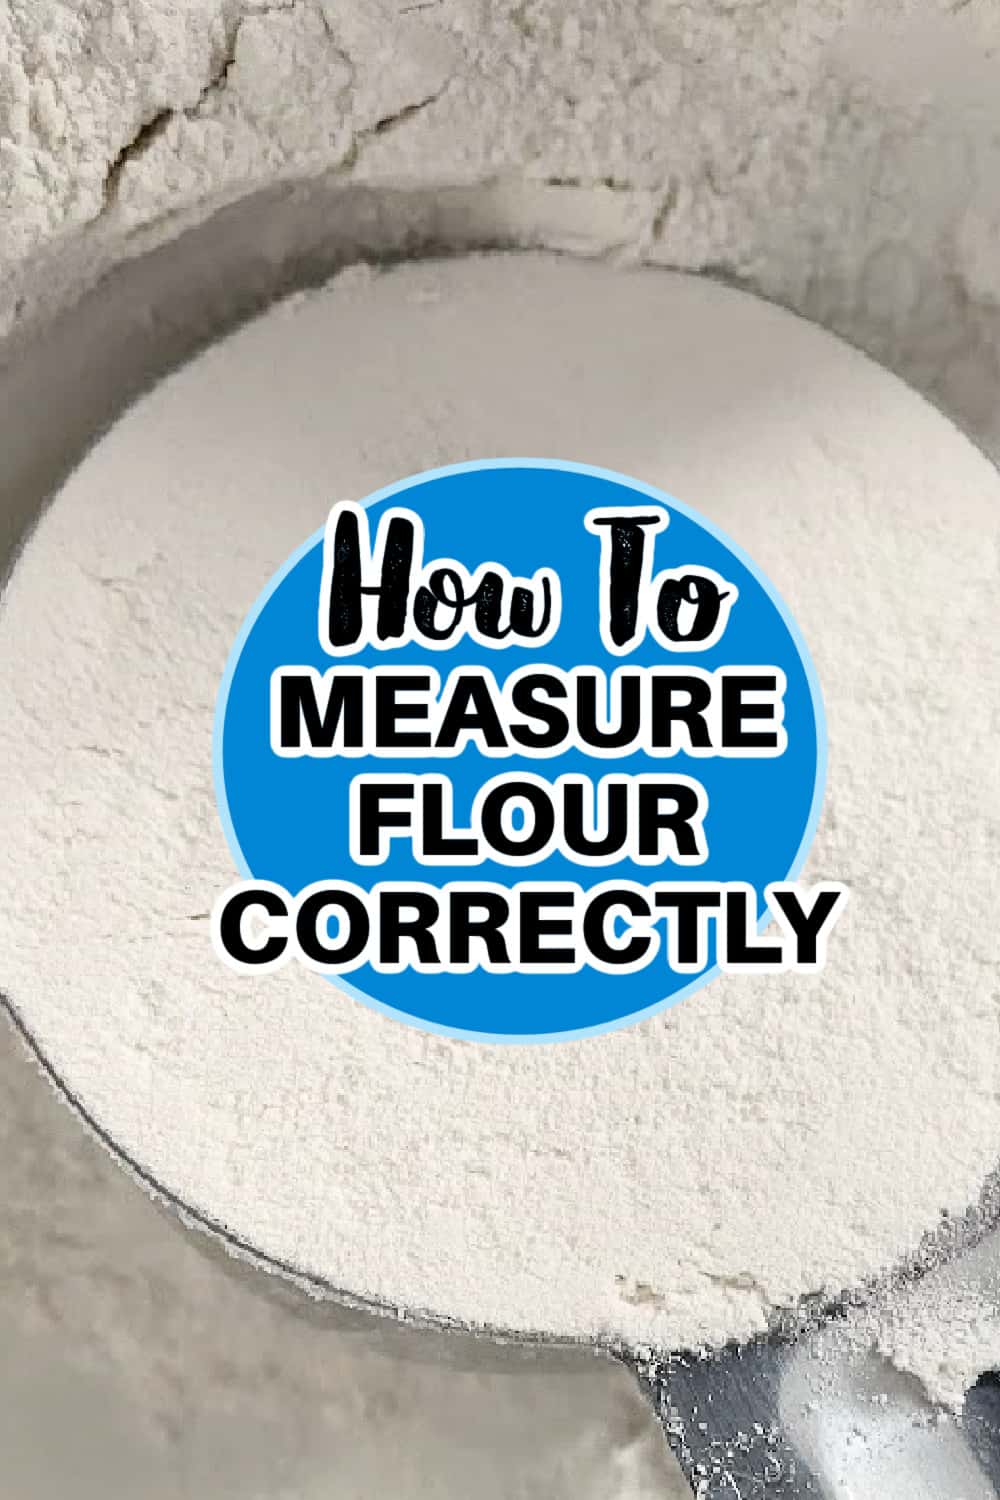 How To MEASURE FLOUR CORRECTLY